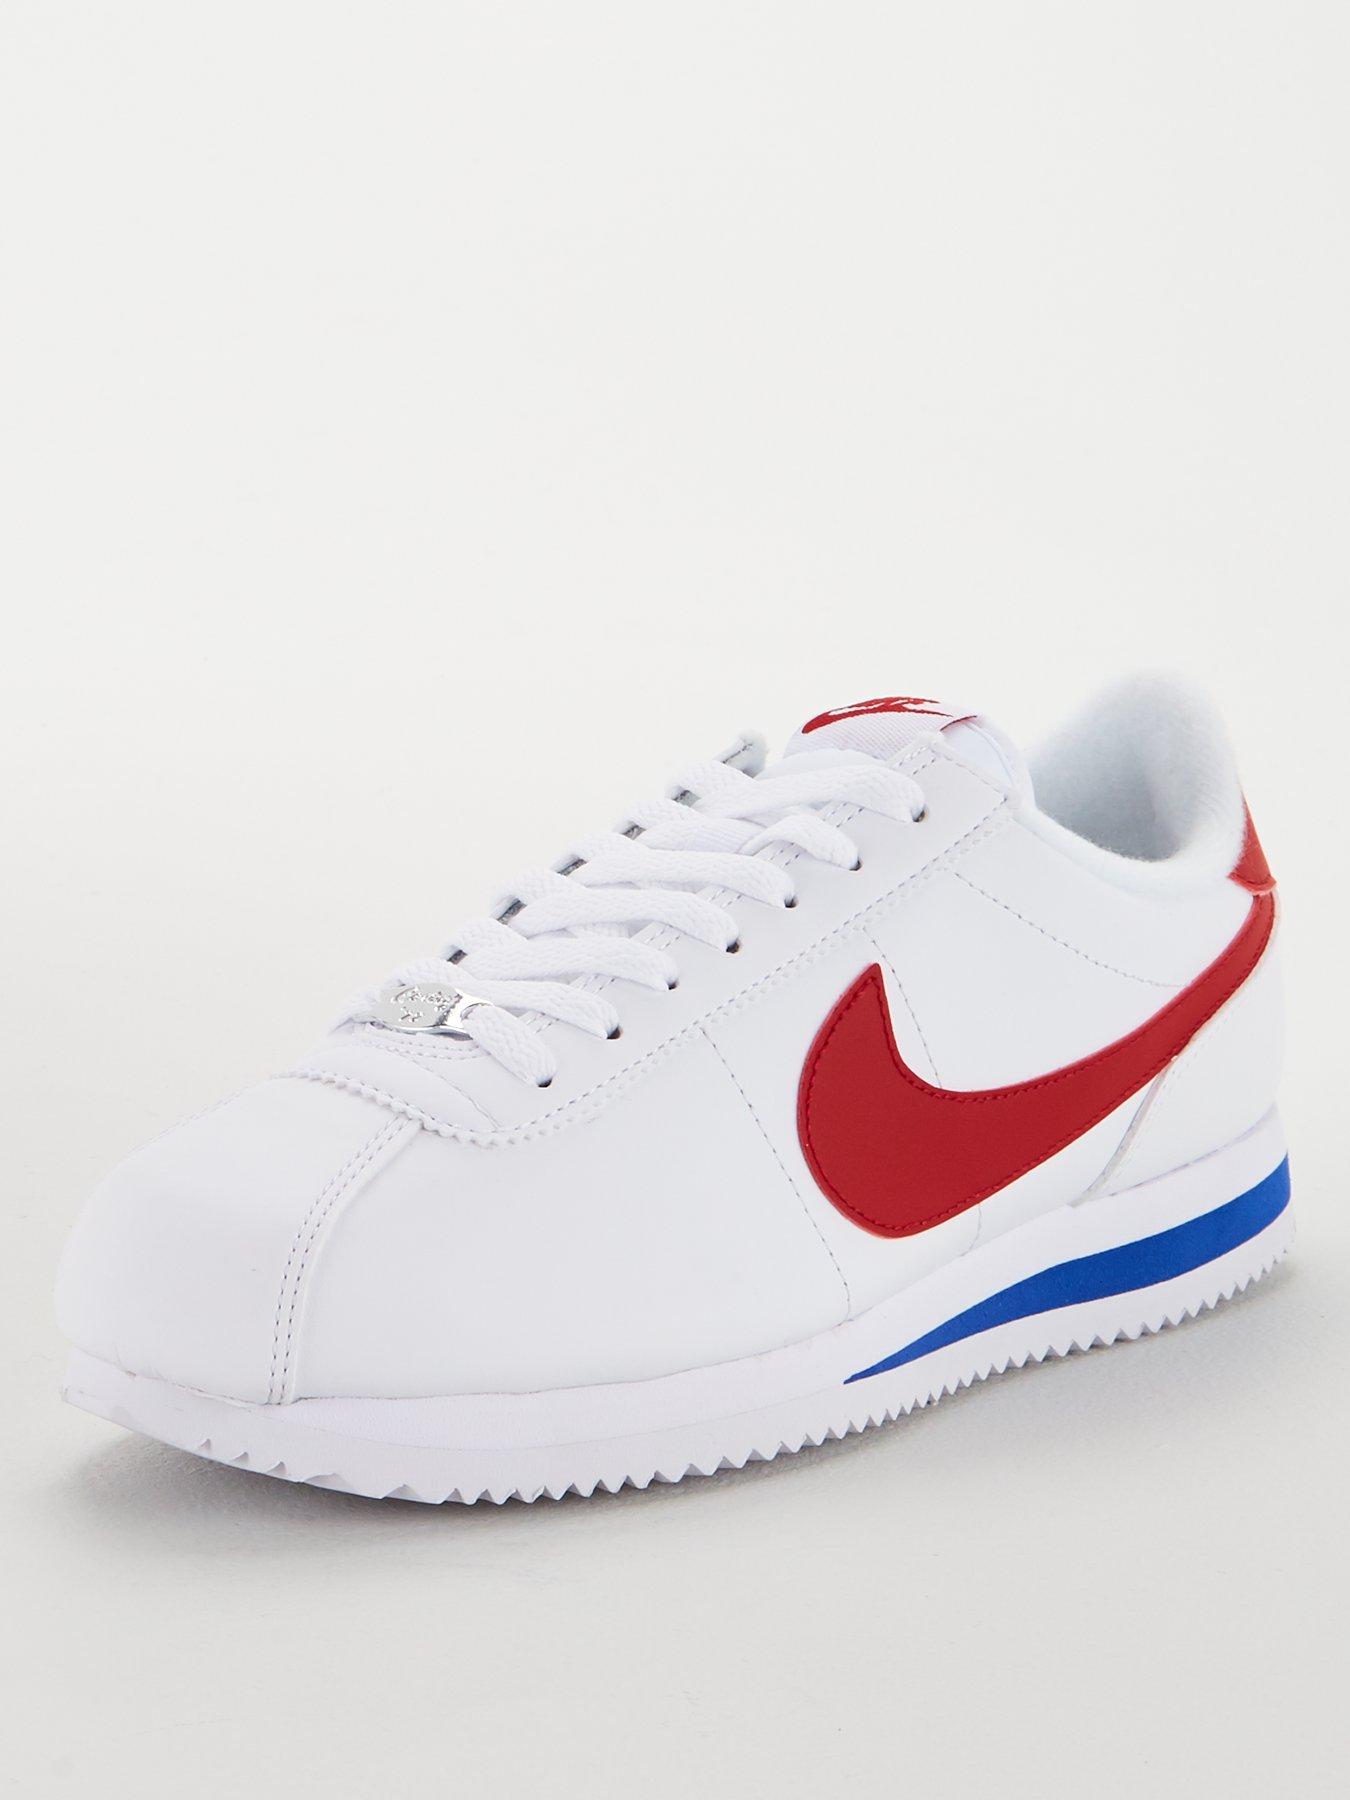 red and blue nike cortez